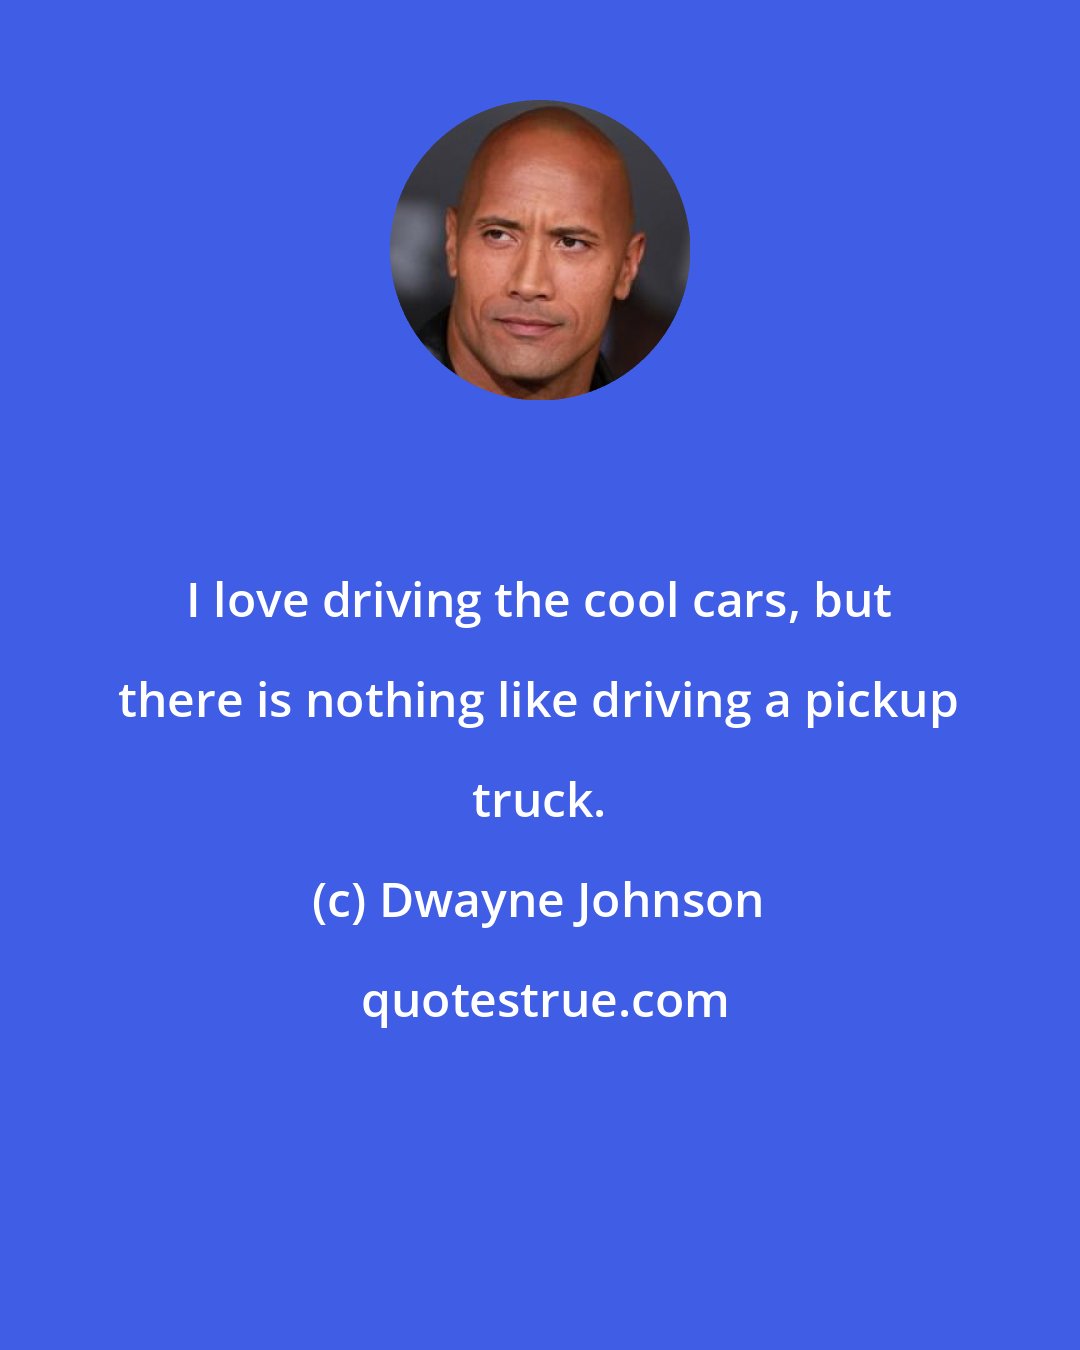 Dwayne Johnson: I love driving the cool cars, but there is nothing like driving a pickup truck.